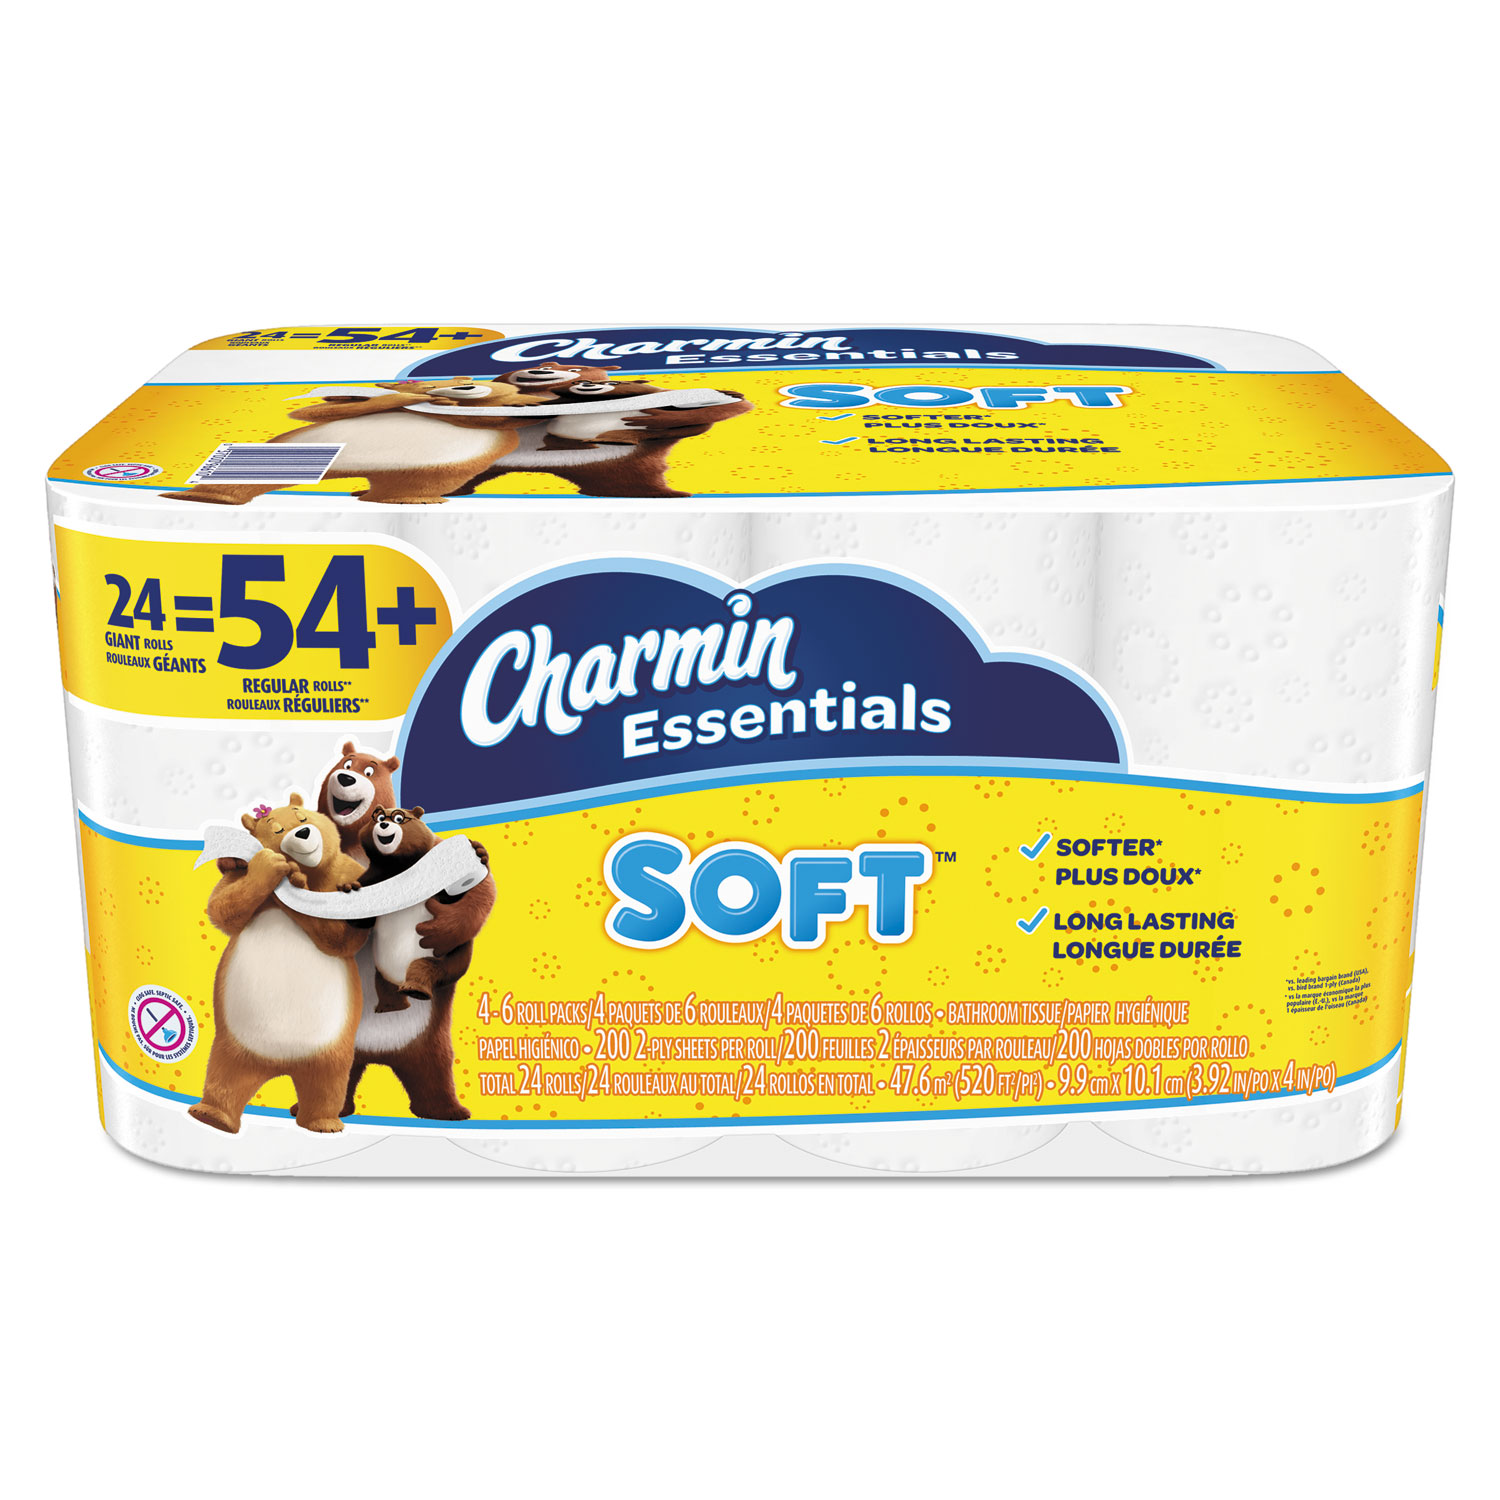  Charmin 96610 Essentials Soft Bathroom Tissue, Septic Safe, 2-Ply, White, 4 x 3.92, 200/Roll, 24 Roll/Pack (PGC96610) 